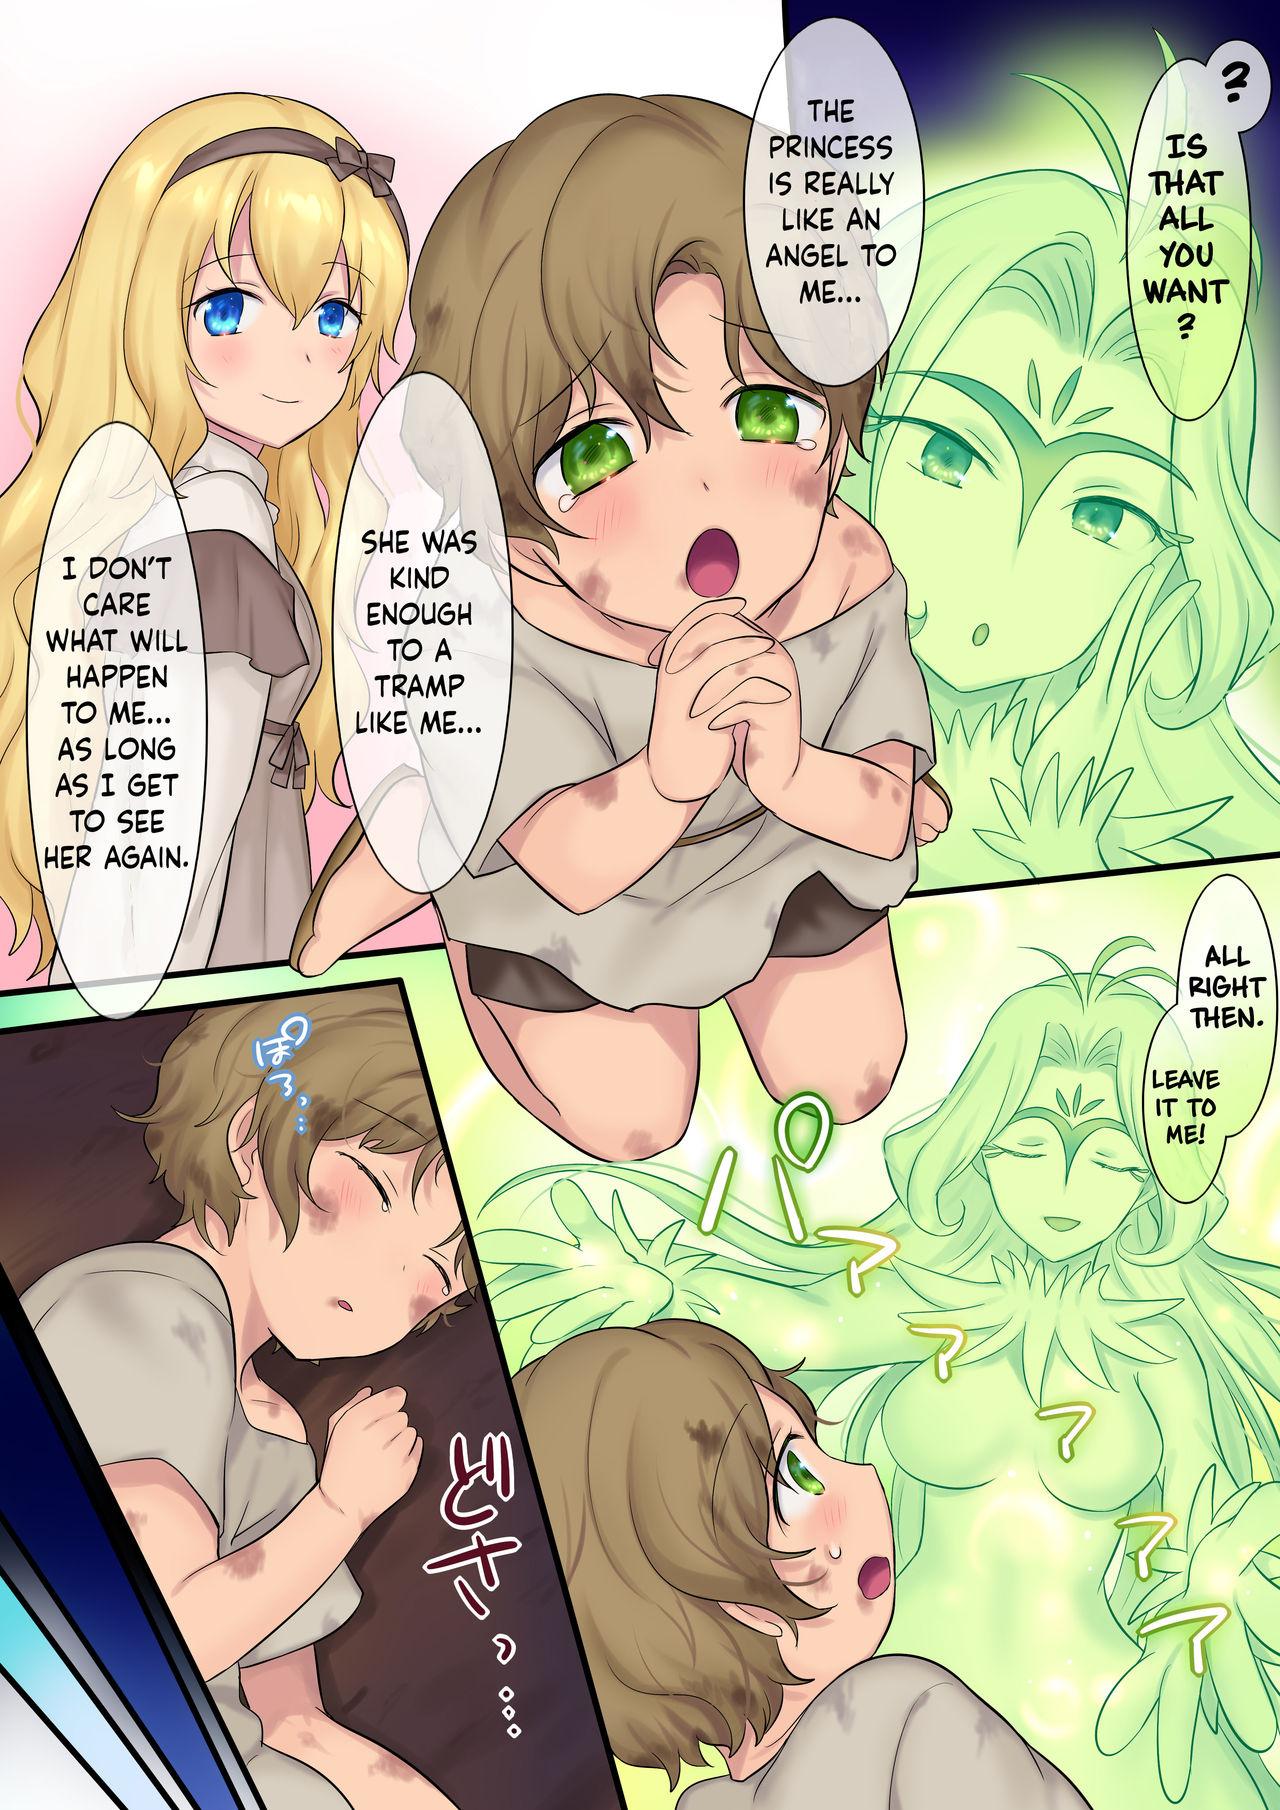 Leave it to the fairy! Three genderbent fairy tales 23